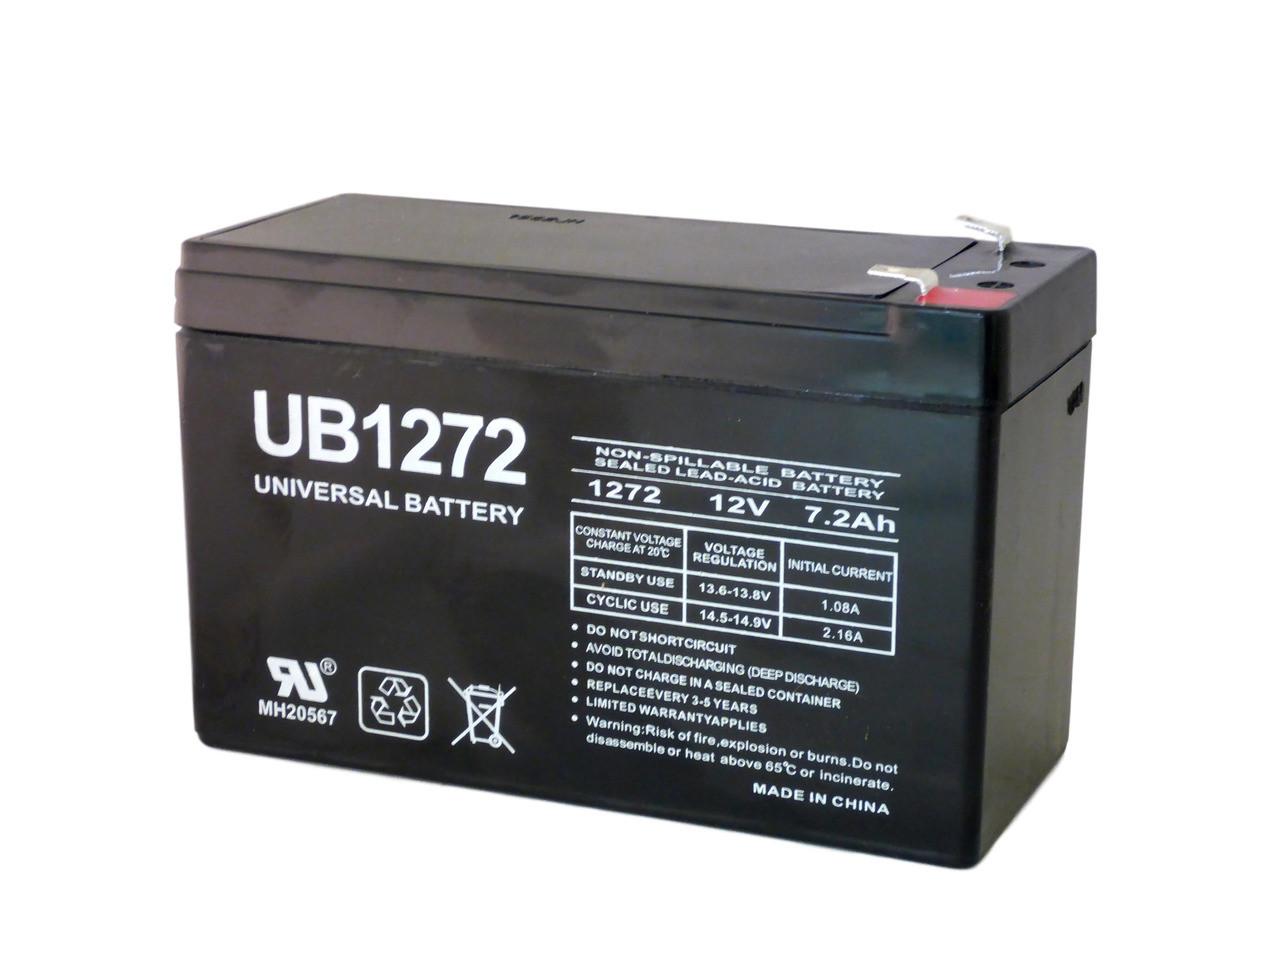 Gp1272 12v. CSB Battery co GP 1272 f2. Аккумулятор wbr gp1272 f2 12v/28w. Батарея f2fr 12v/7.2Ah. NP 2,6-12 fr 12v 2,6 Ah Sealed Rechargeable lead- acid Battery.